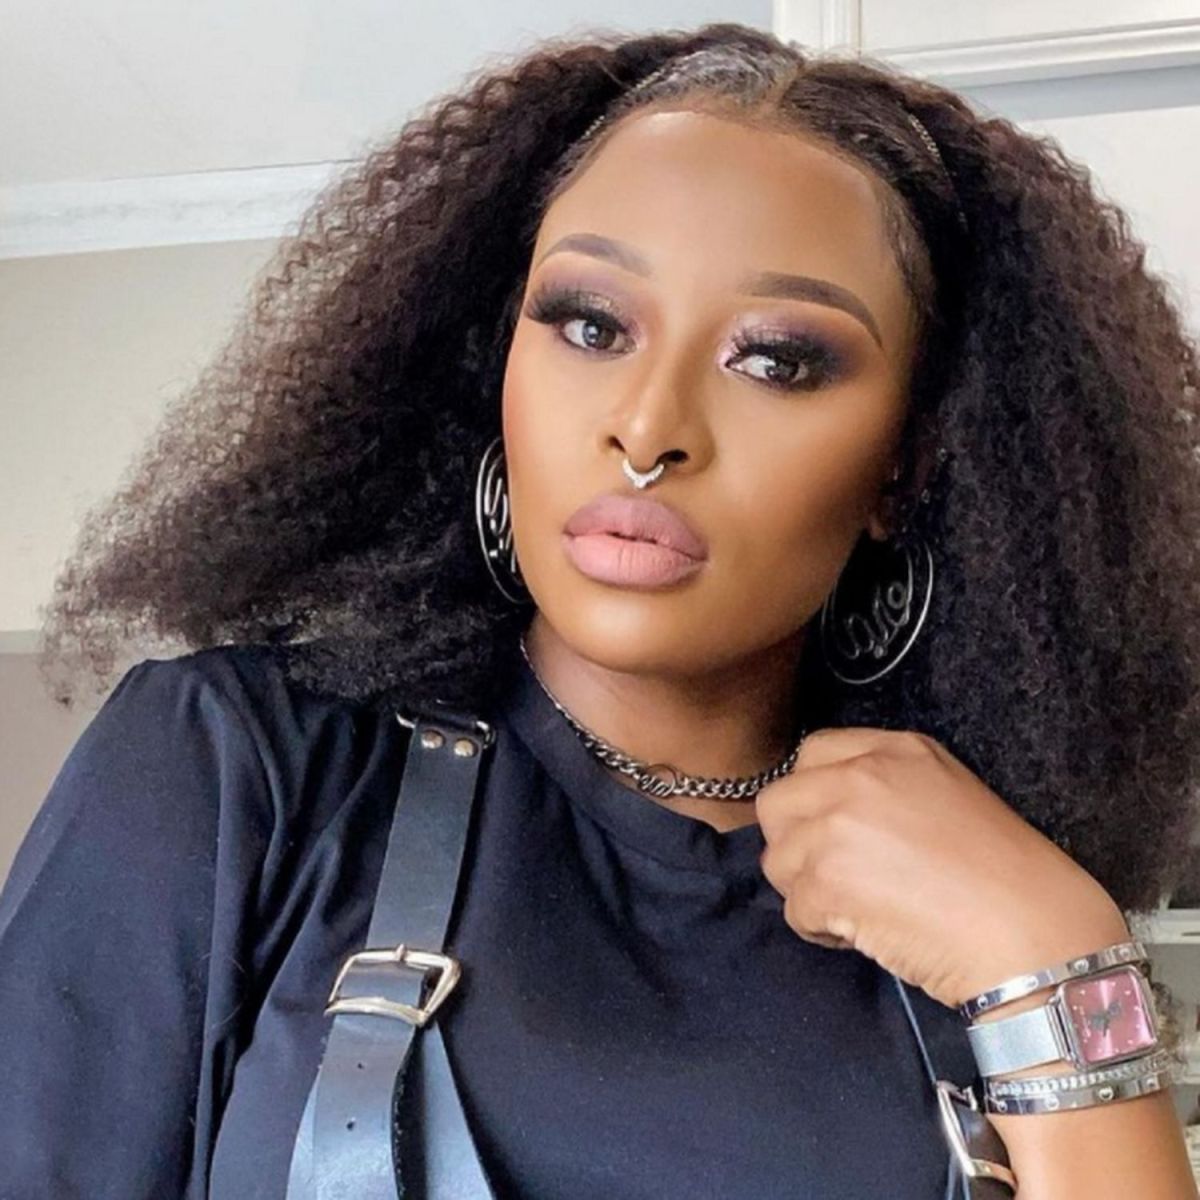 Dj Zinhle Reacts To Backlash Over Not Knowing How To Cook 9